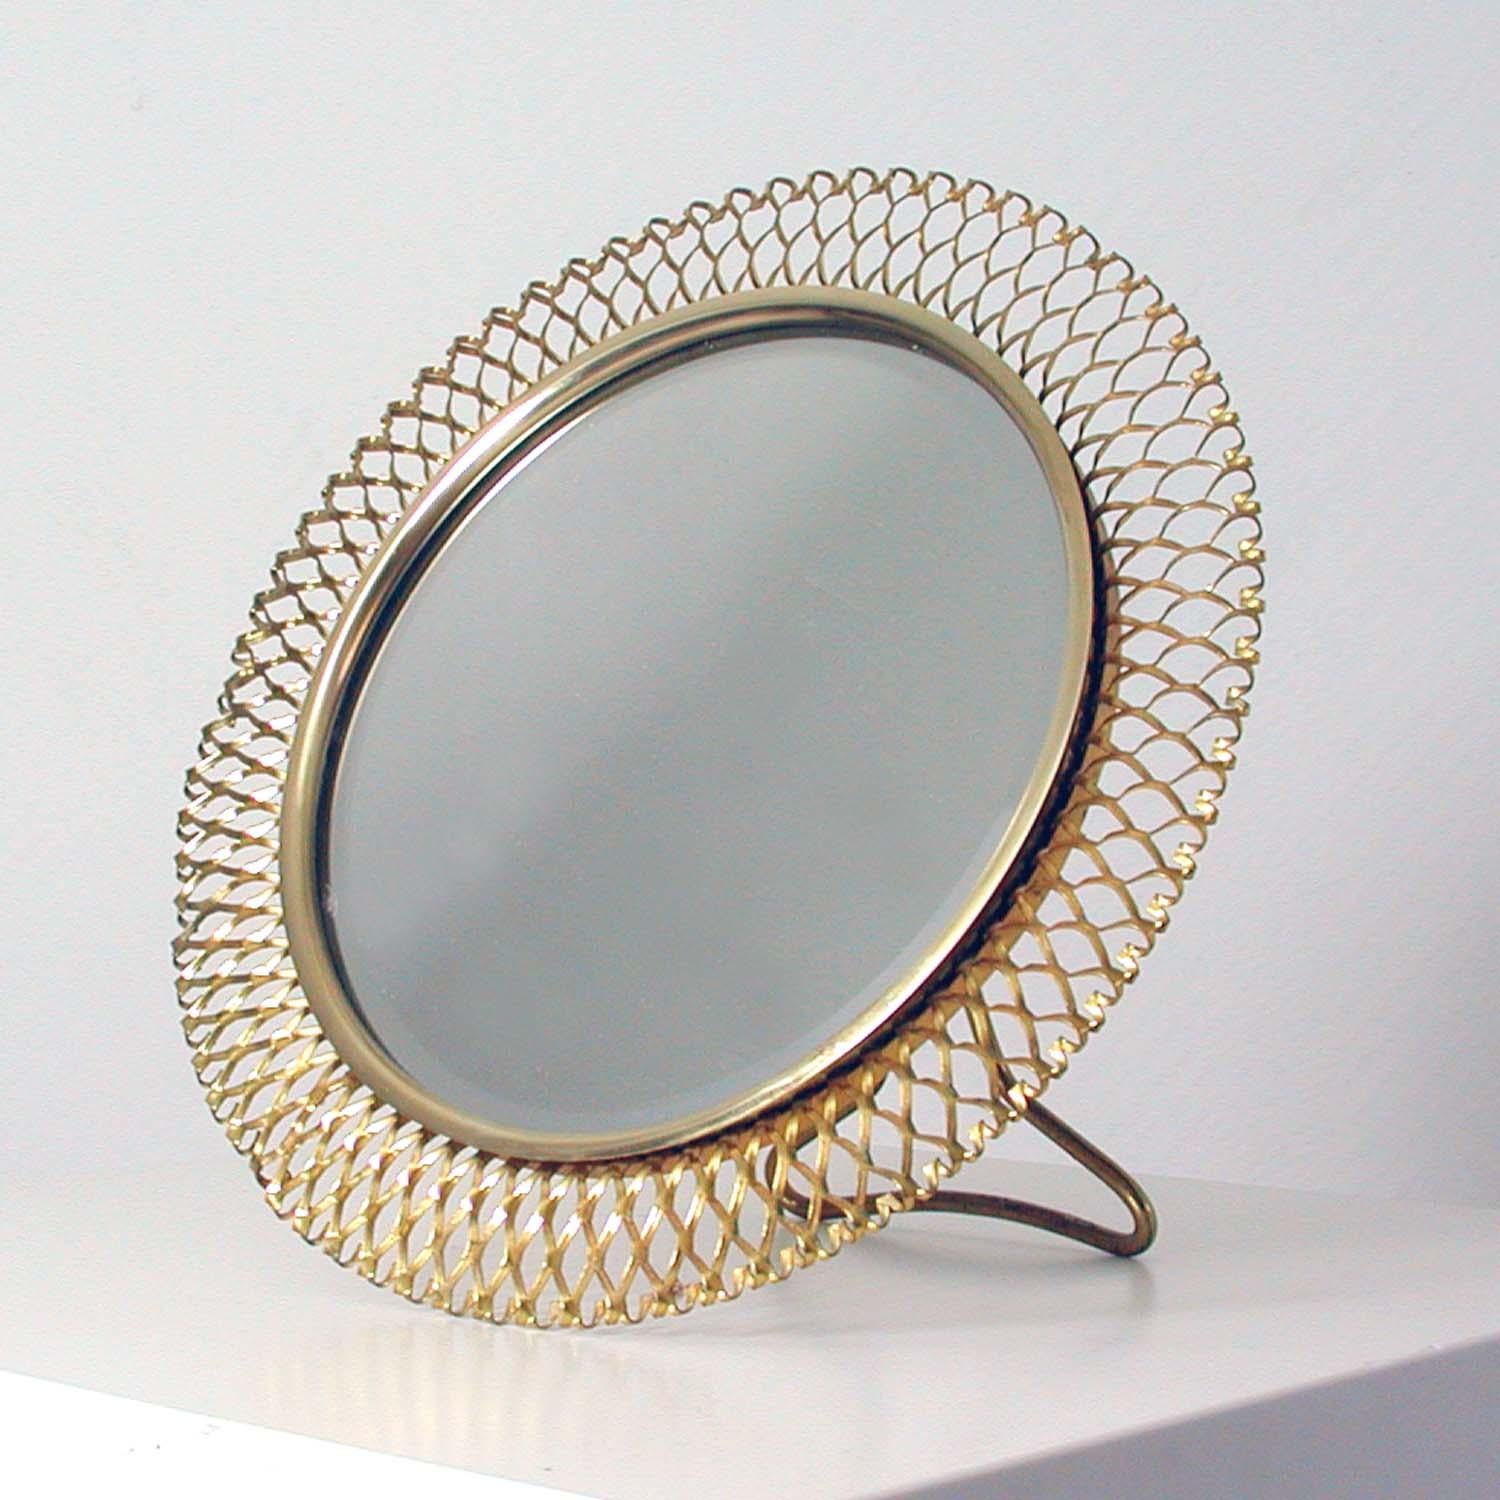 This beautiful round midcentury table mirror was designed and manufactured in Germany in the 1950s by Vereinigte Werkstätten München. It is made of a brass stretched metal frame in the manner of French Designer Mathieu Matégot. The rear is made of